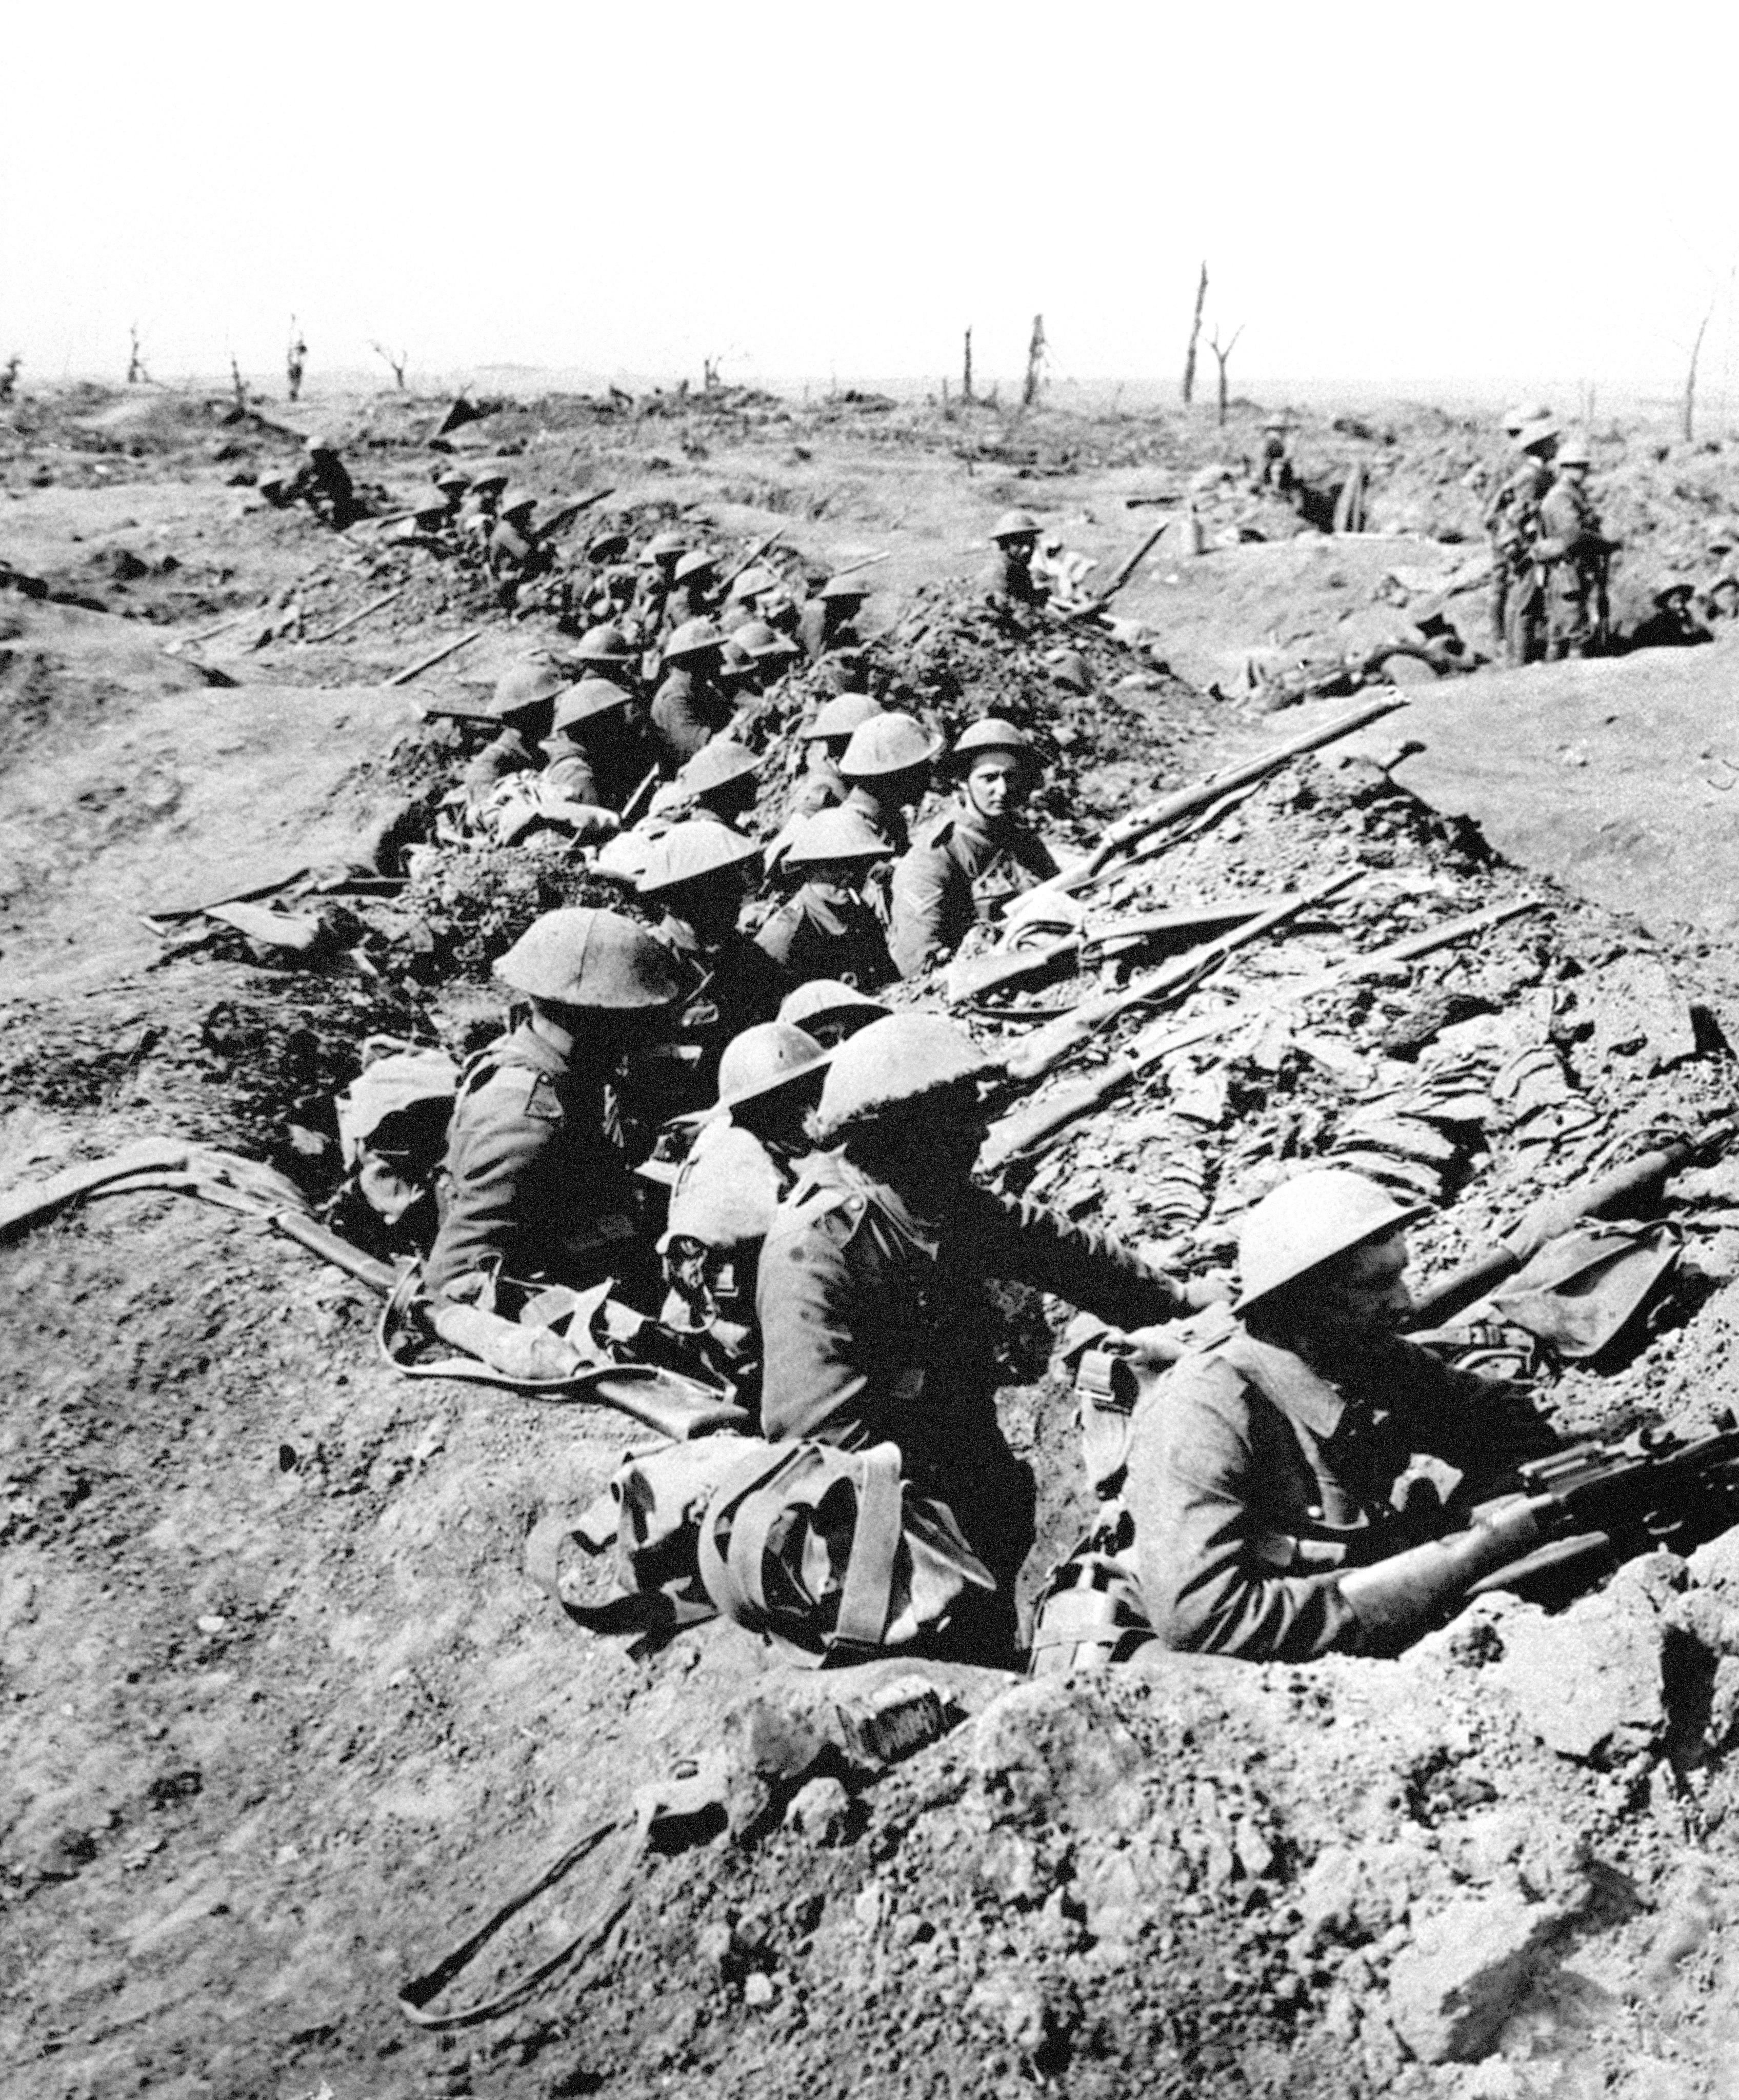 British infantrymen occupy a shallow trench in a ruined landscape before an advance during the Battle of the Somme 